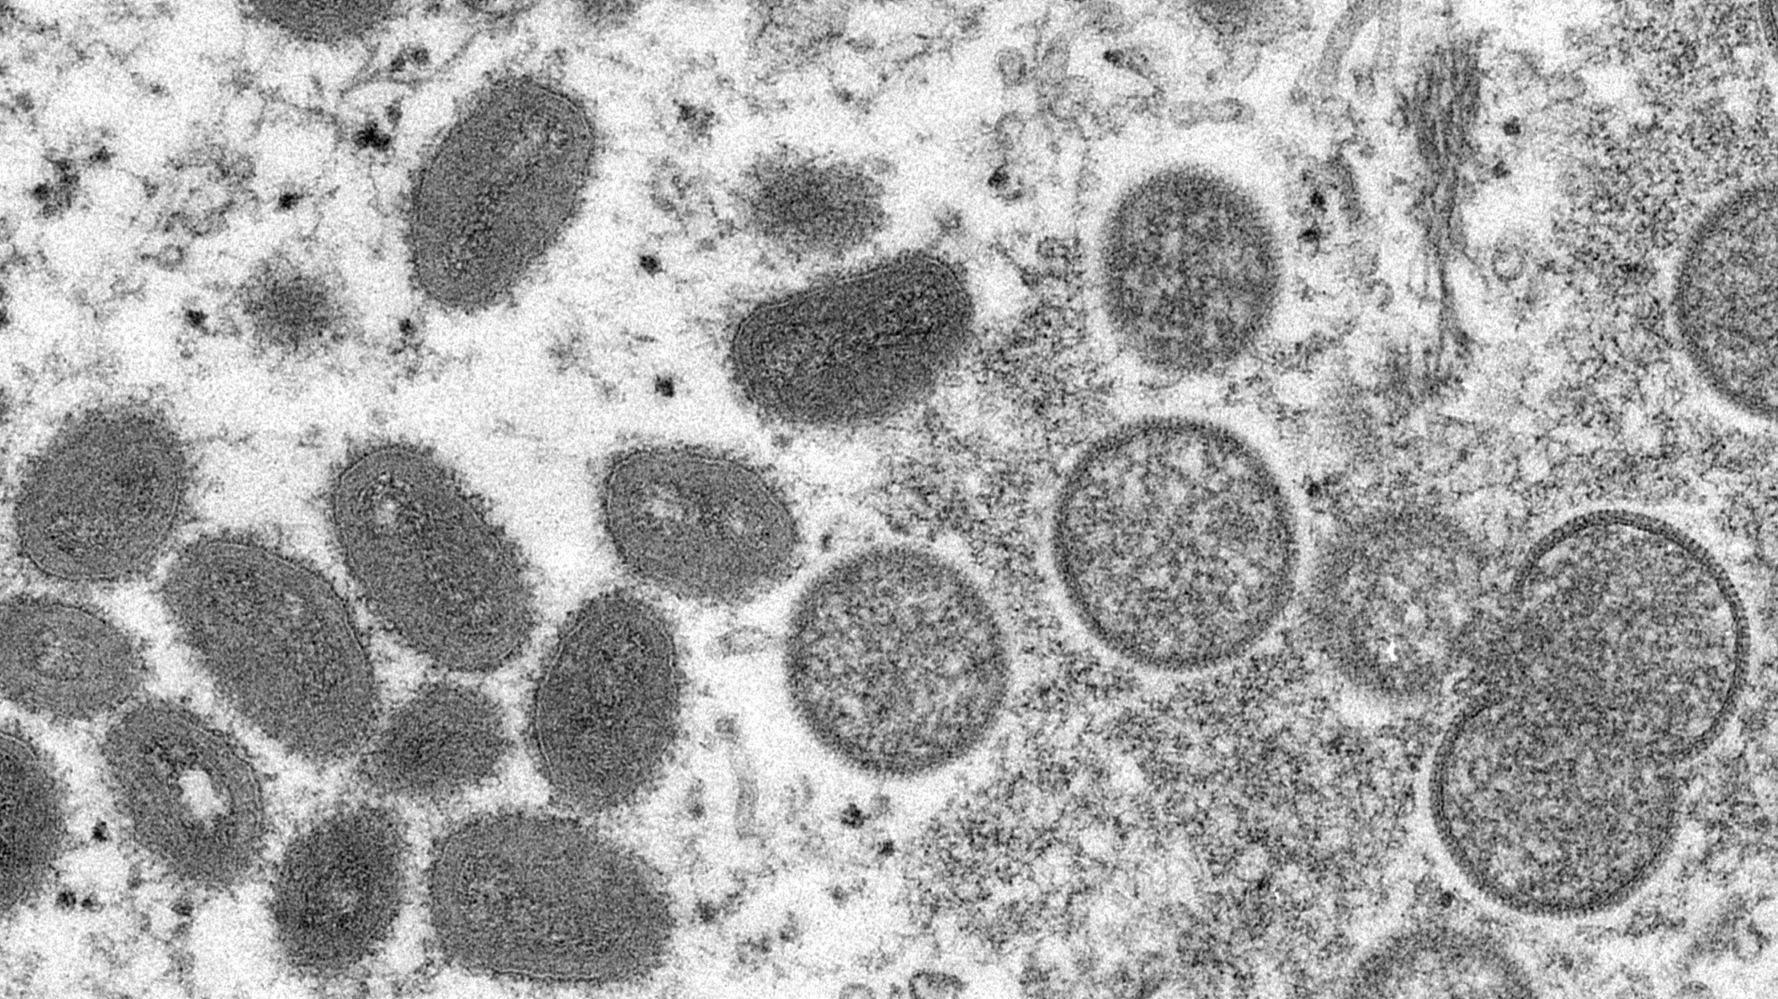 There May Be 2 Distinct Strains Of Monkeypox Circulating In The U.S.